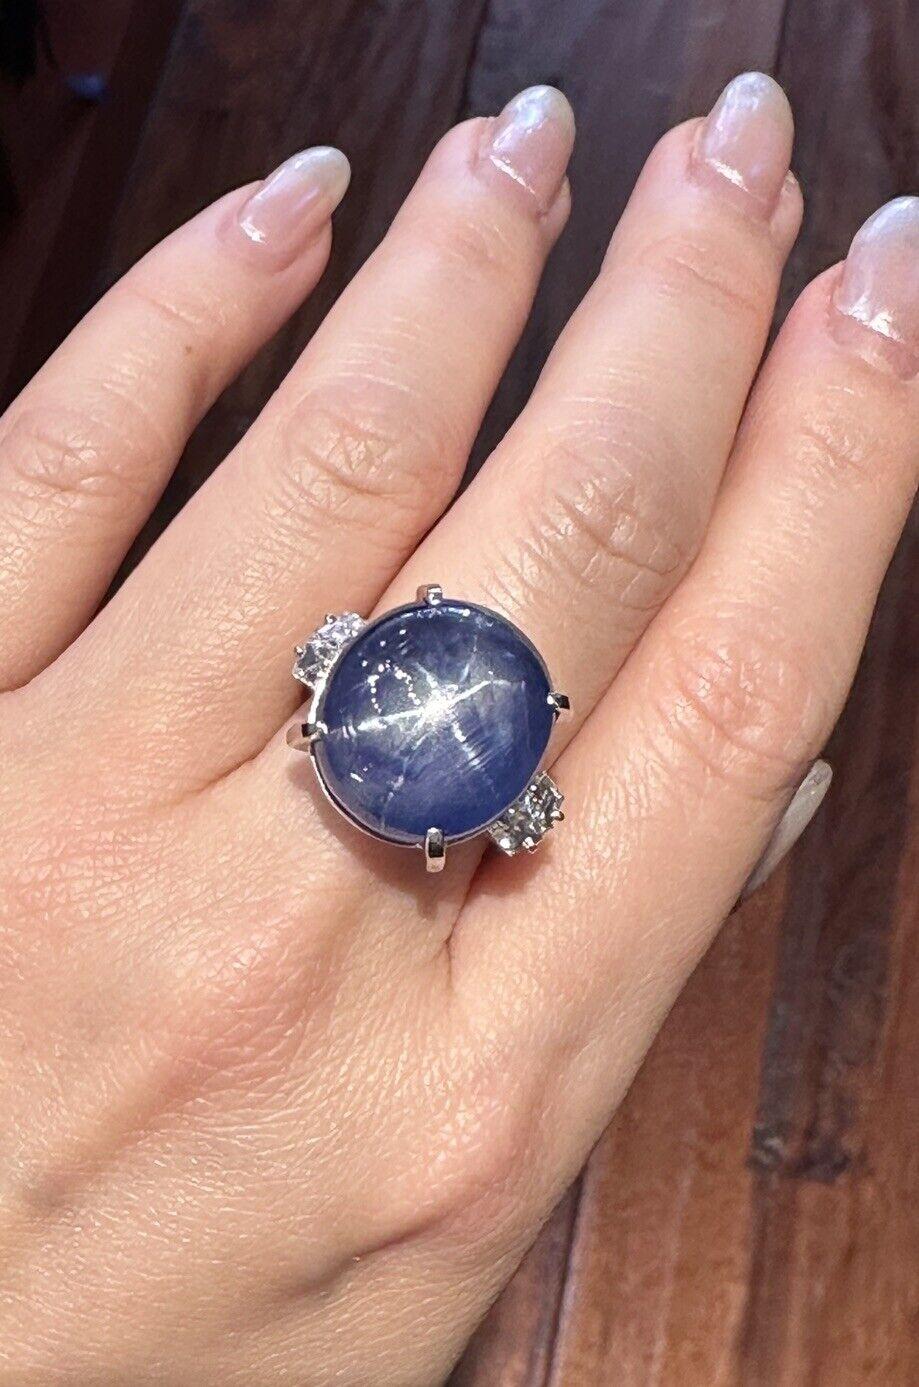 GIA Certified Unheated Blue Star Sapphire Cabochon Ring 46.90 Carat with Diamonds in Platinum 

Blue Star Sapphire Ring features a 46.90 Carat Natural Blue Star Sapphire Cabochon accented by two square cut diamonds on each side set in Platinum.

The